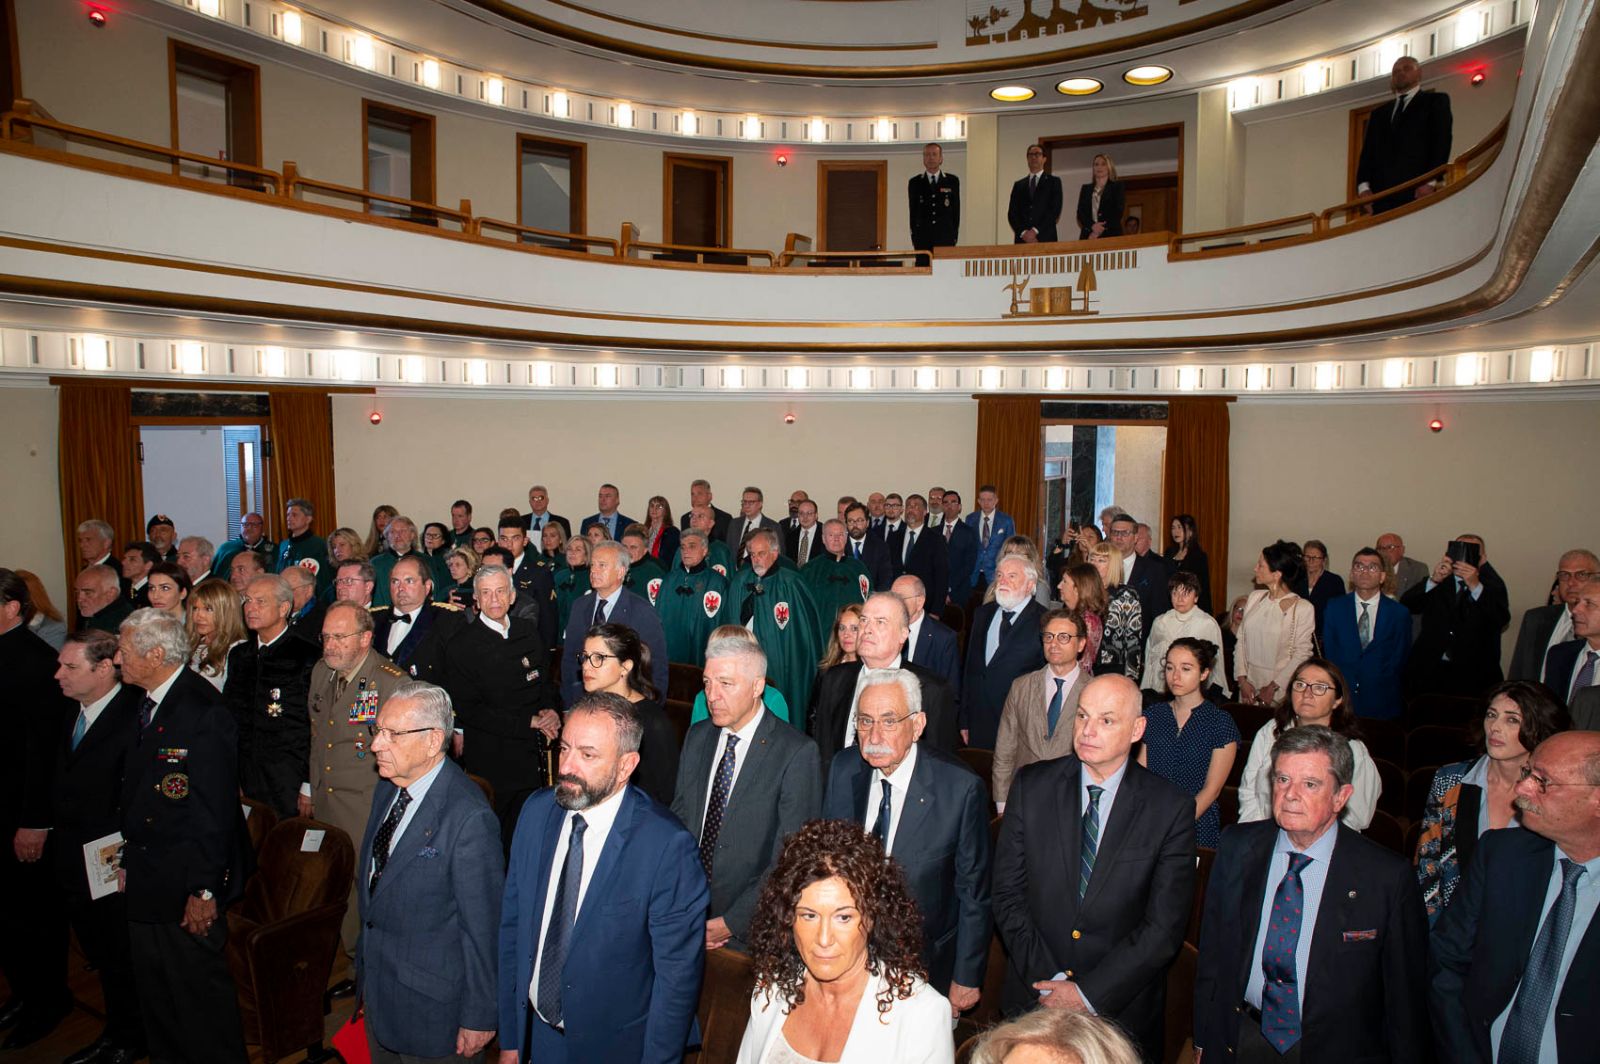 The Ambassador Held a Speech During an International Conference in San Marino